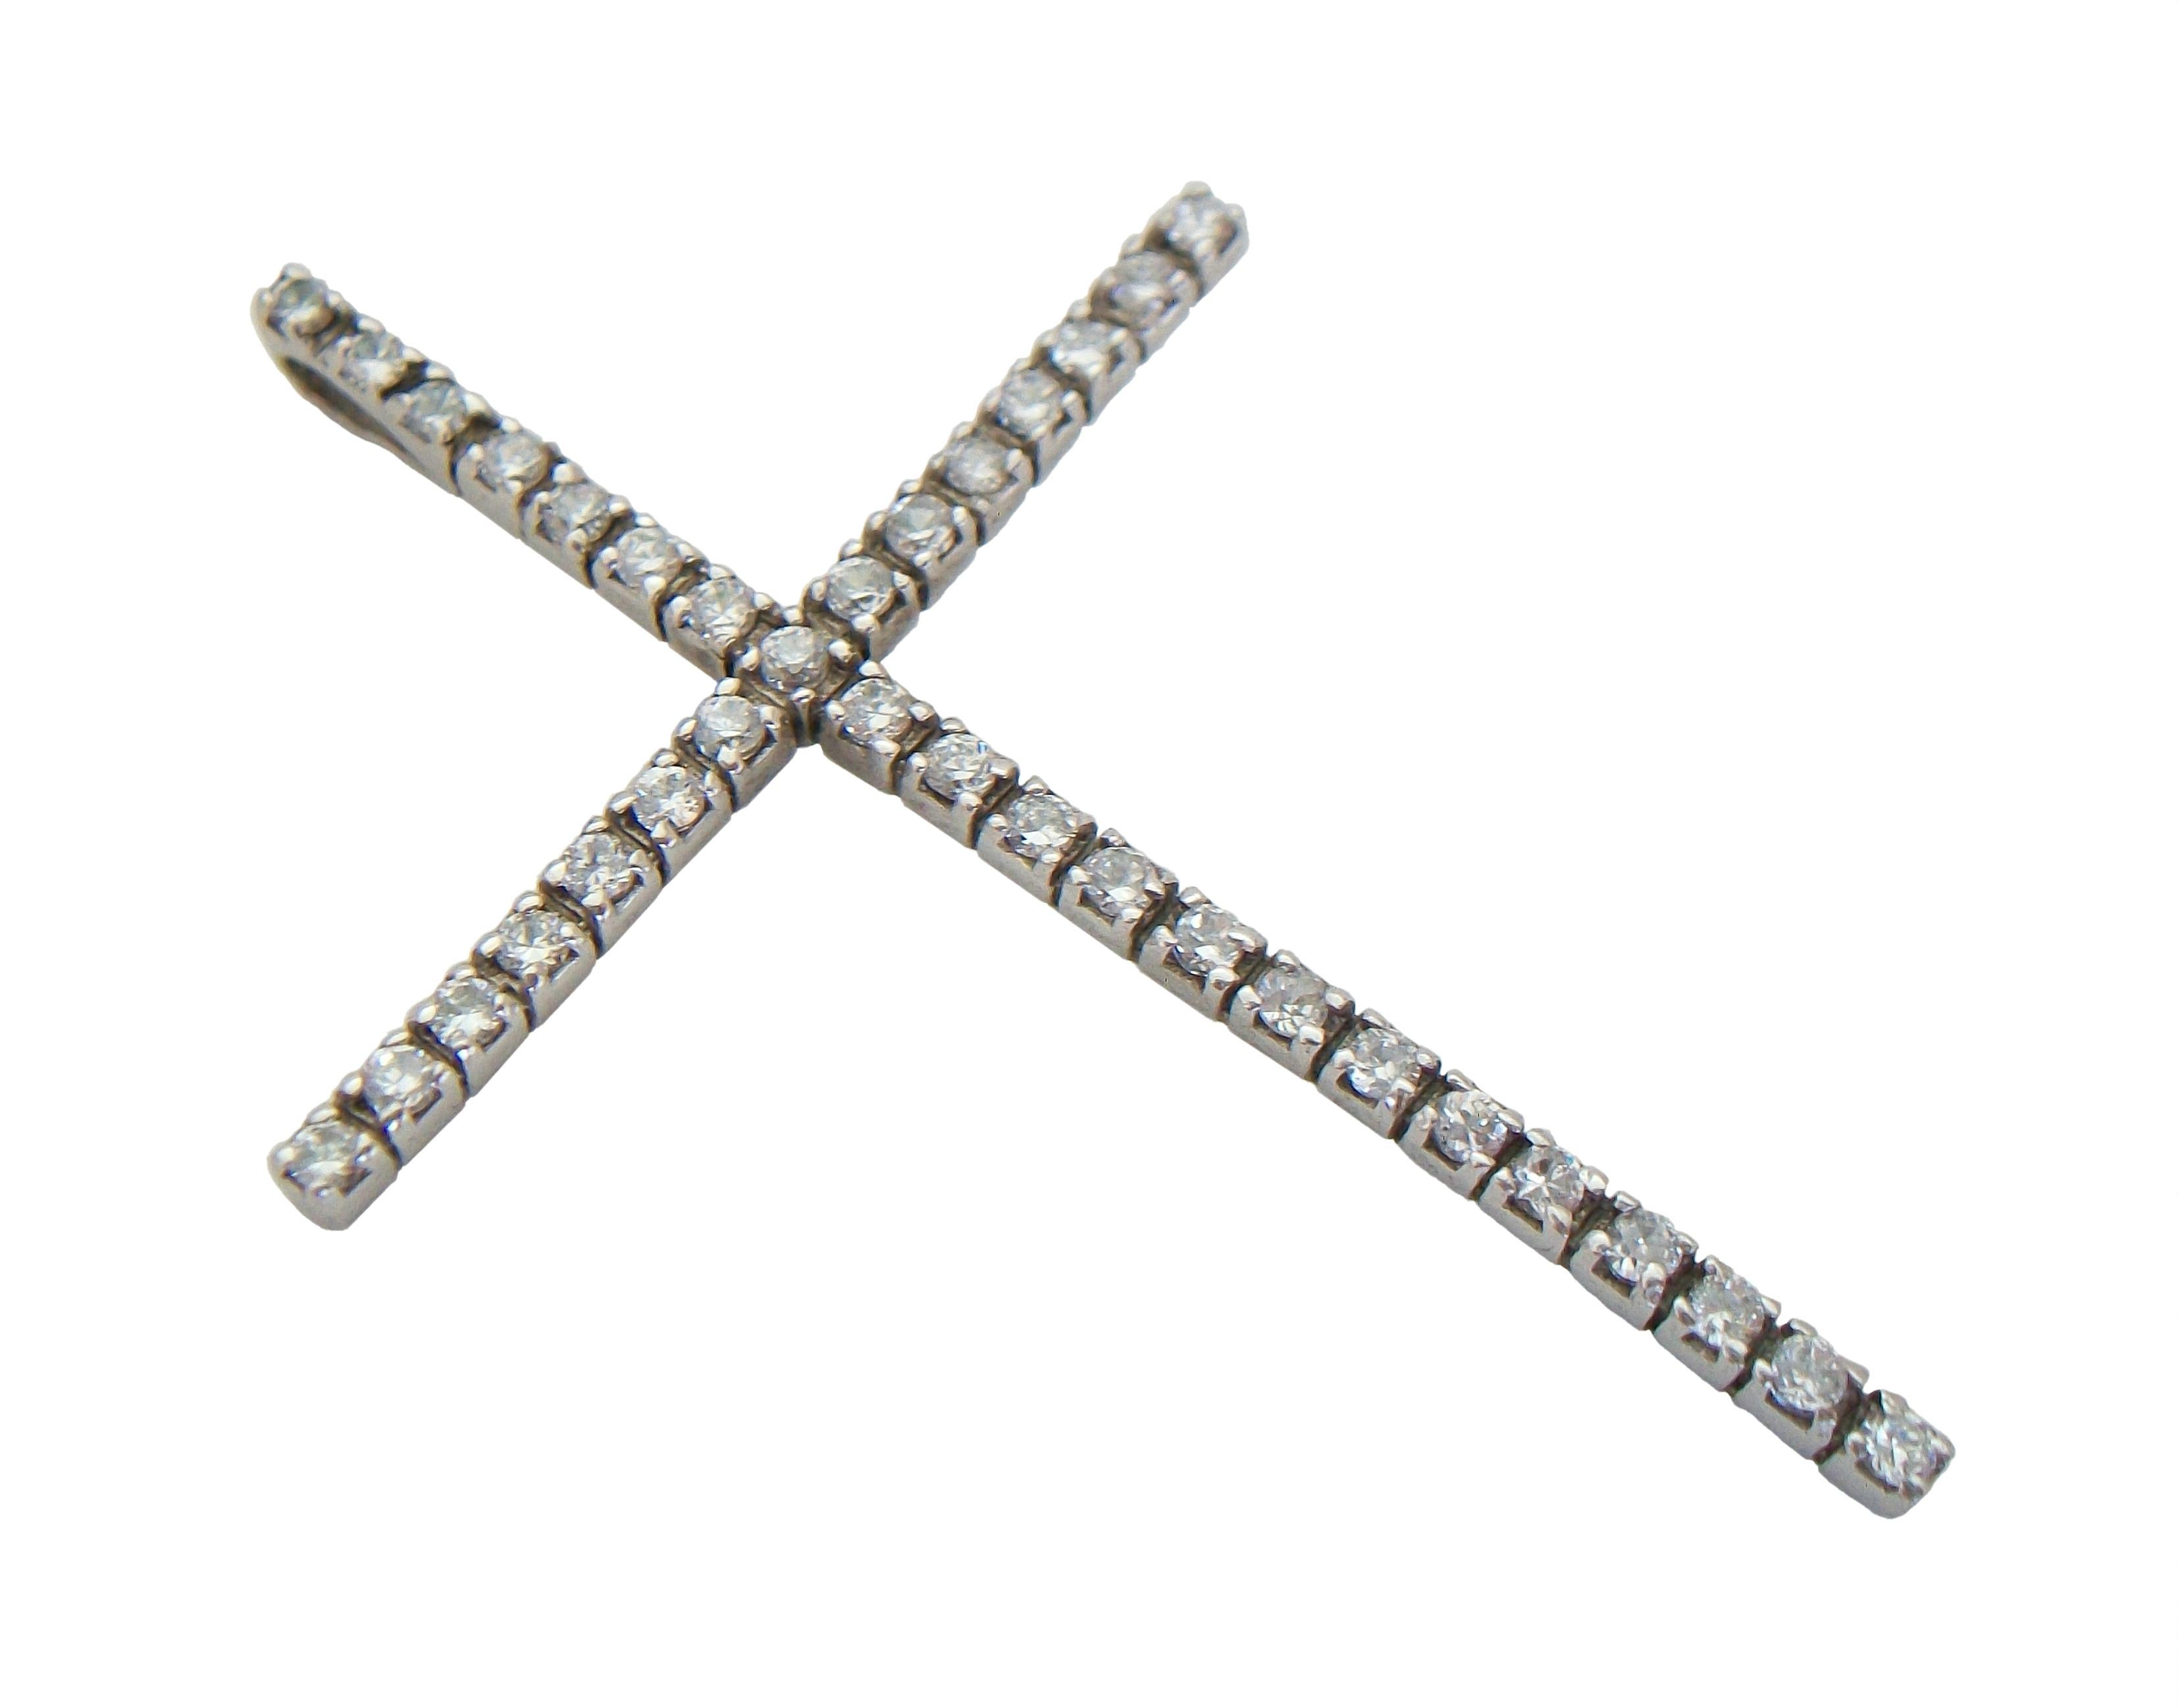 Vintage sterling silver cross pendant - large size - set with 35 crystals (round faceted - claw set - each approx. 2 mm. in diameter) - bale set into the back of the cross - stamped with a flower hallmark and 925 on the bale - unknown origin (likely